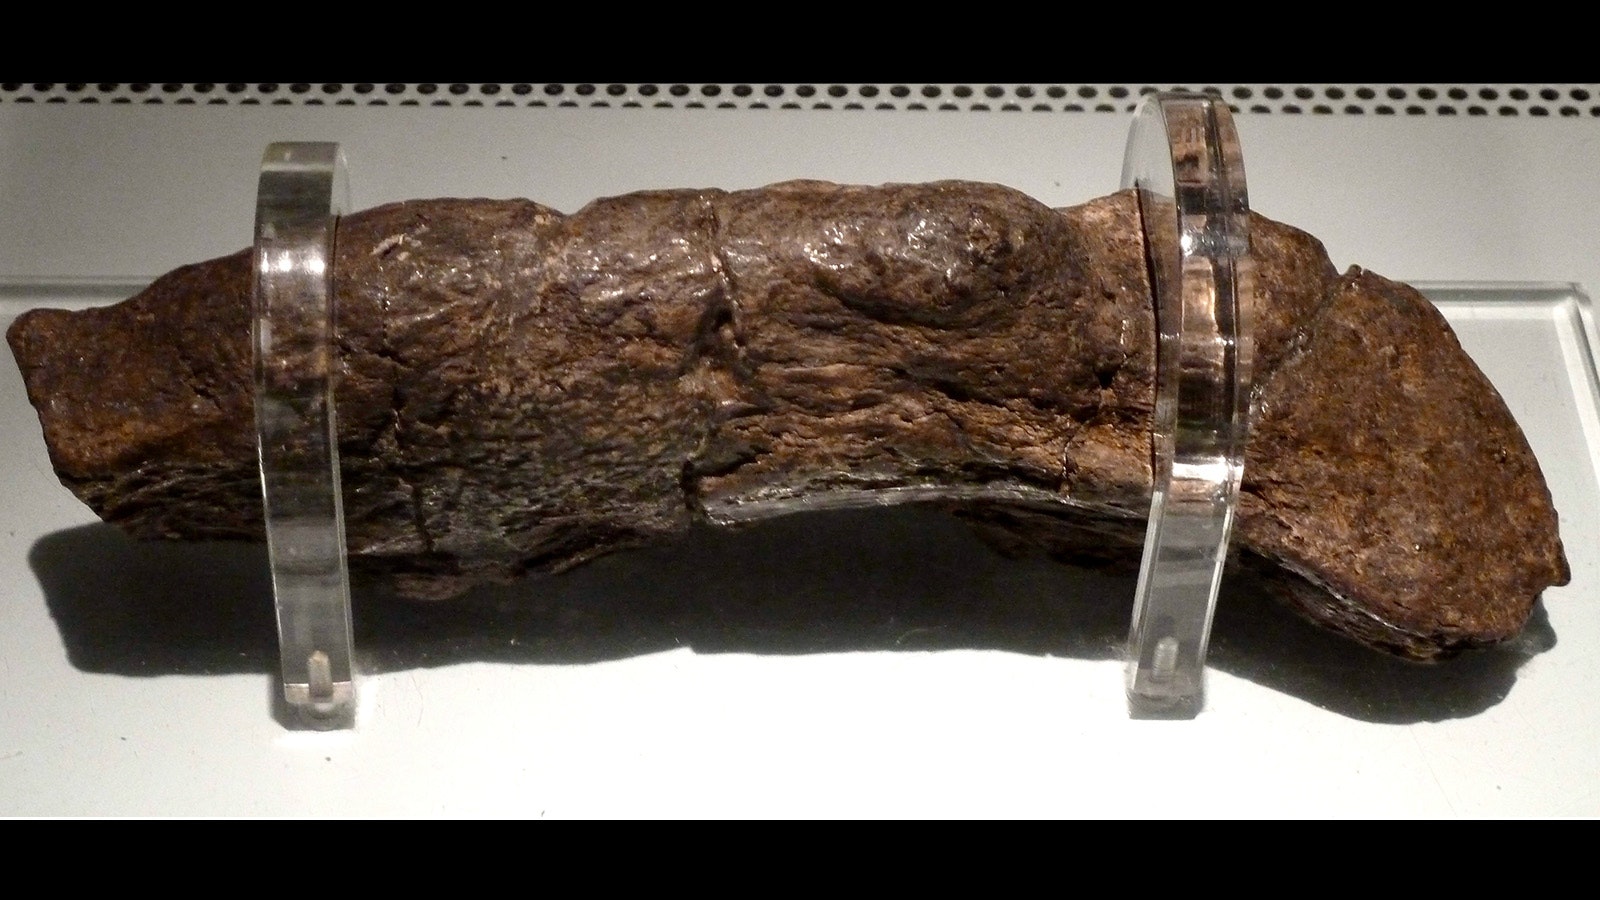 An unknown ninth-century Viking was responsible for this 8-inch-long, 2-inch-wide piece of fossilized human poop, the largest ever recorded.